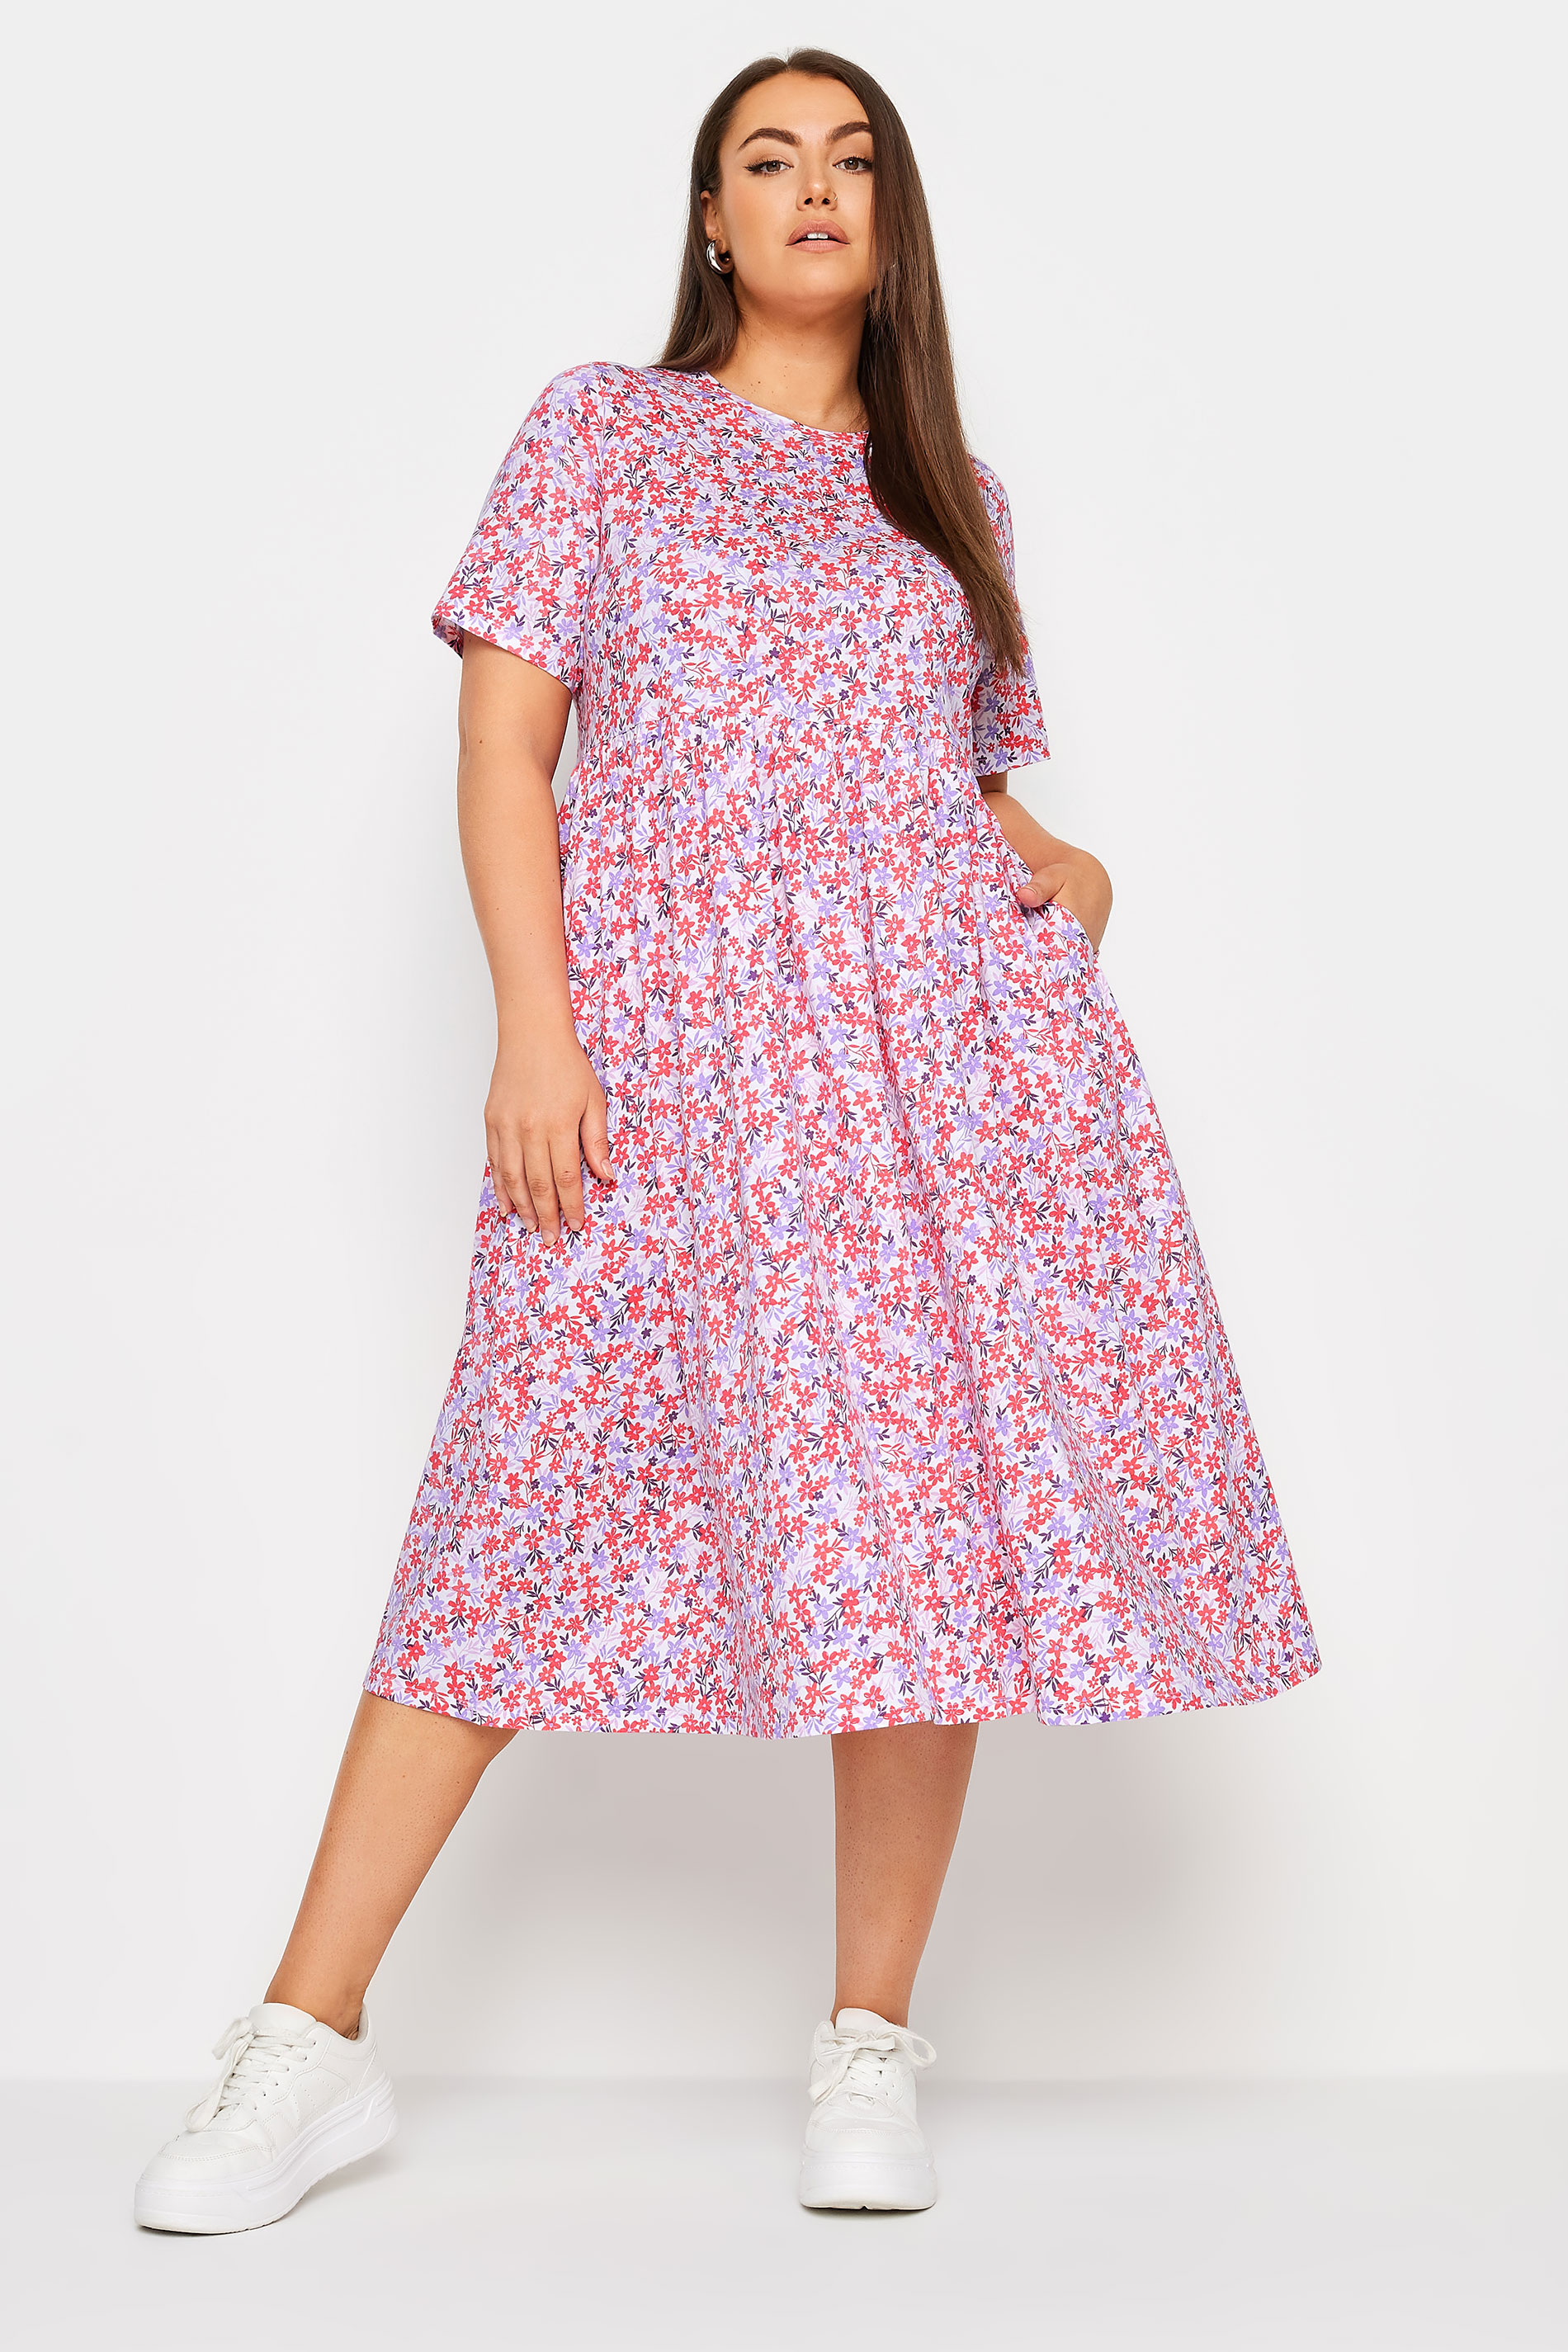 YOURS Plus Size White & Pink Ditsy Floral Pure Cotton Midaxi Dress | Yours Clothing 2